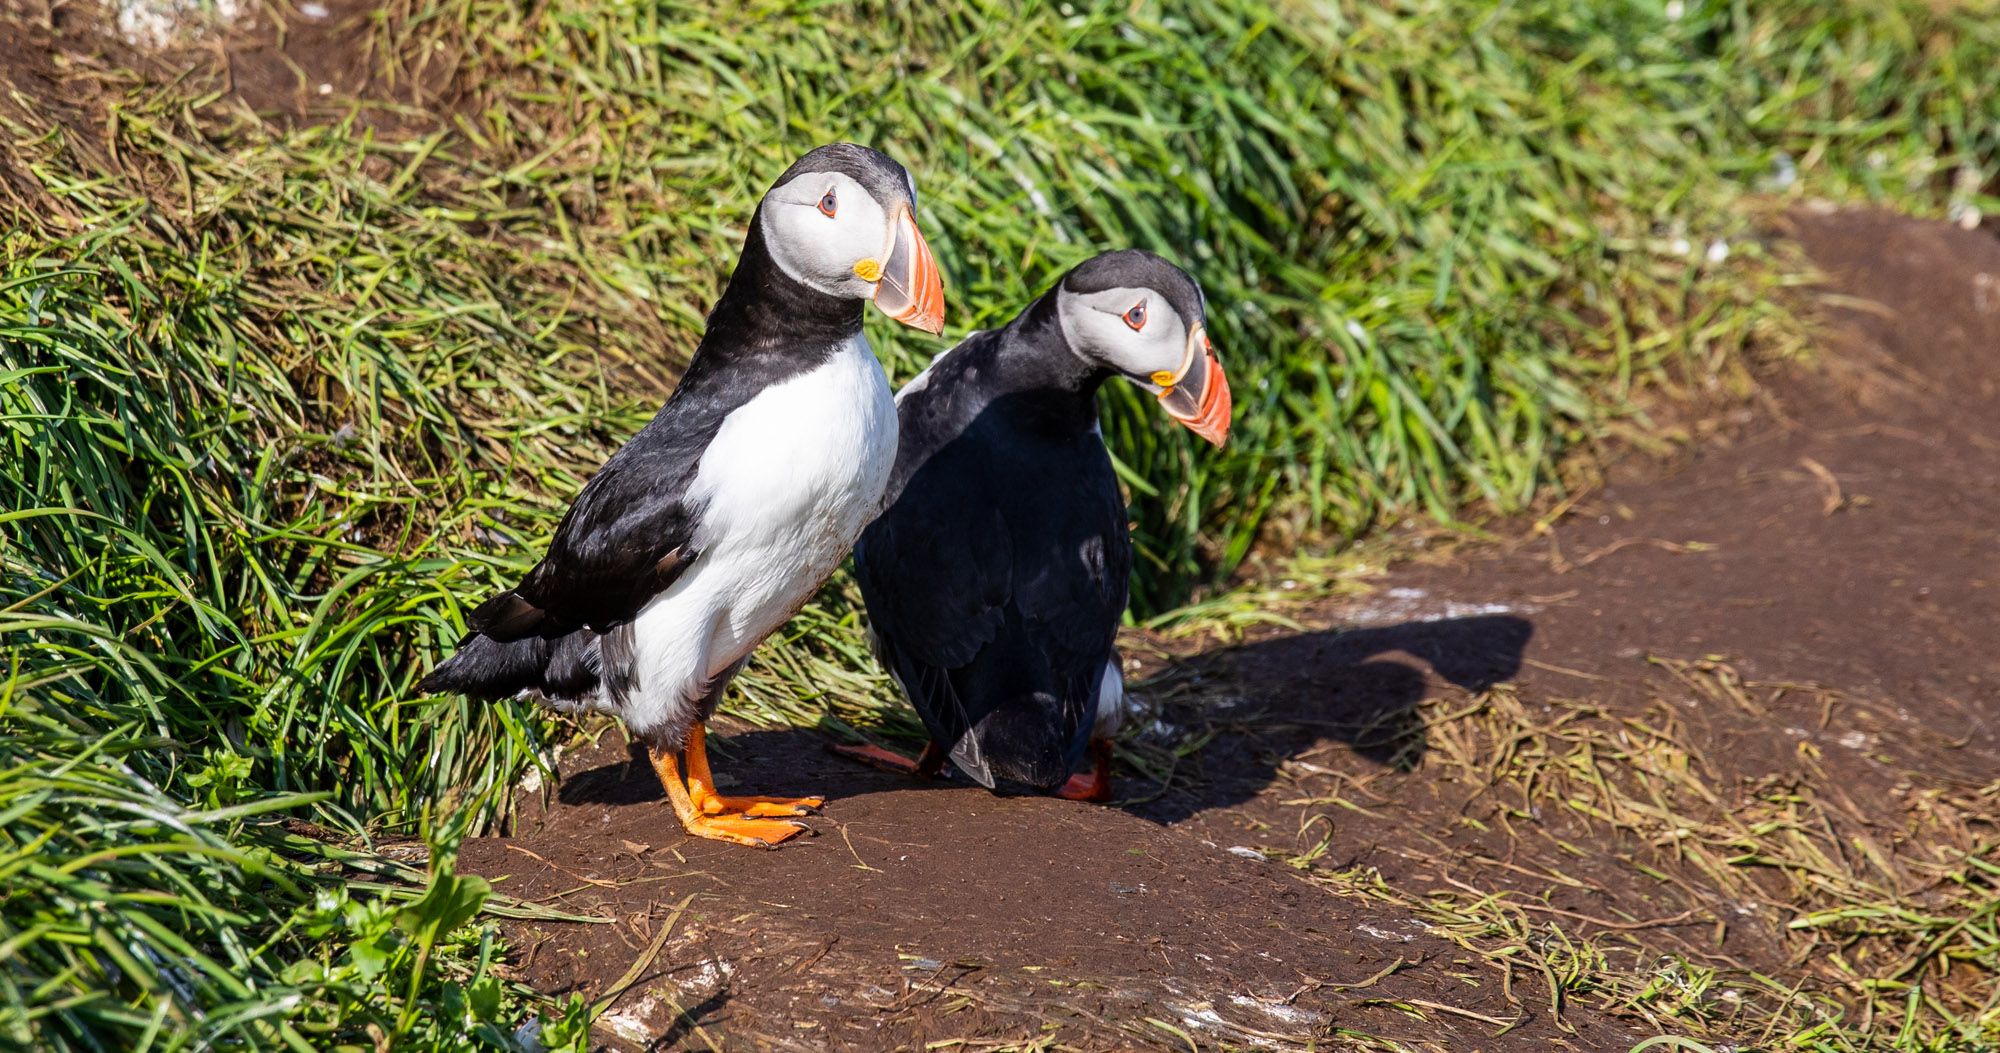 Featured image for “How to See the Puffins at Borgarfjörður Eystri, Iceland”